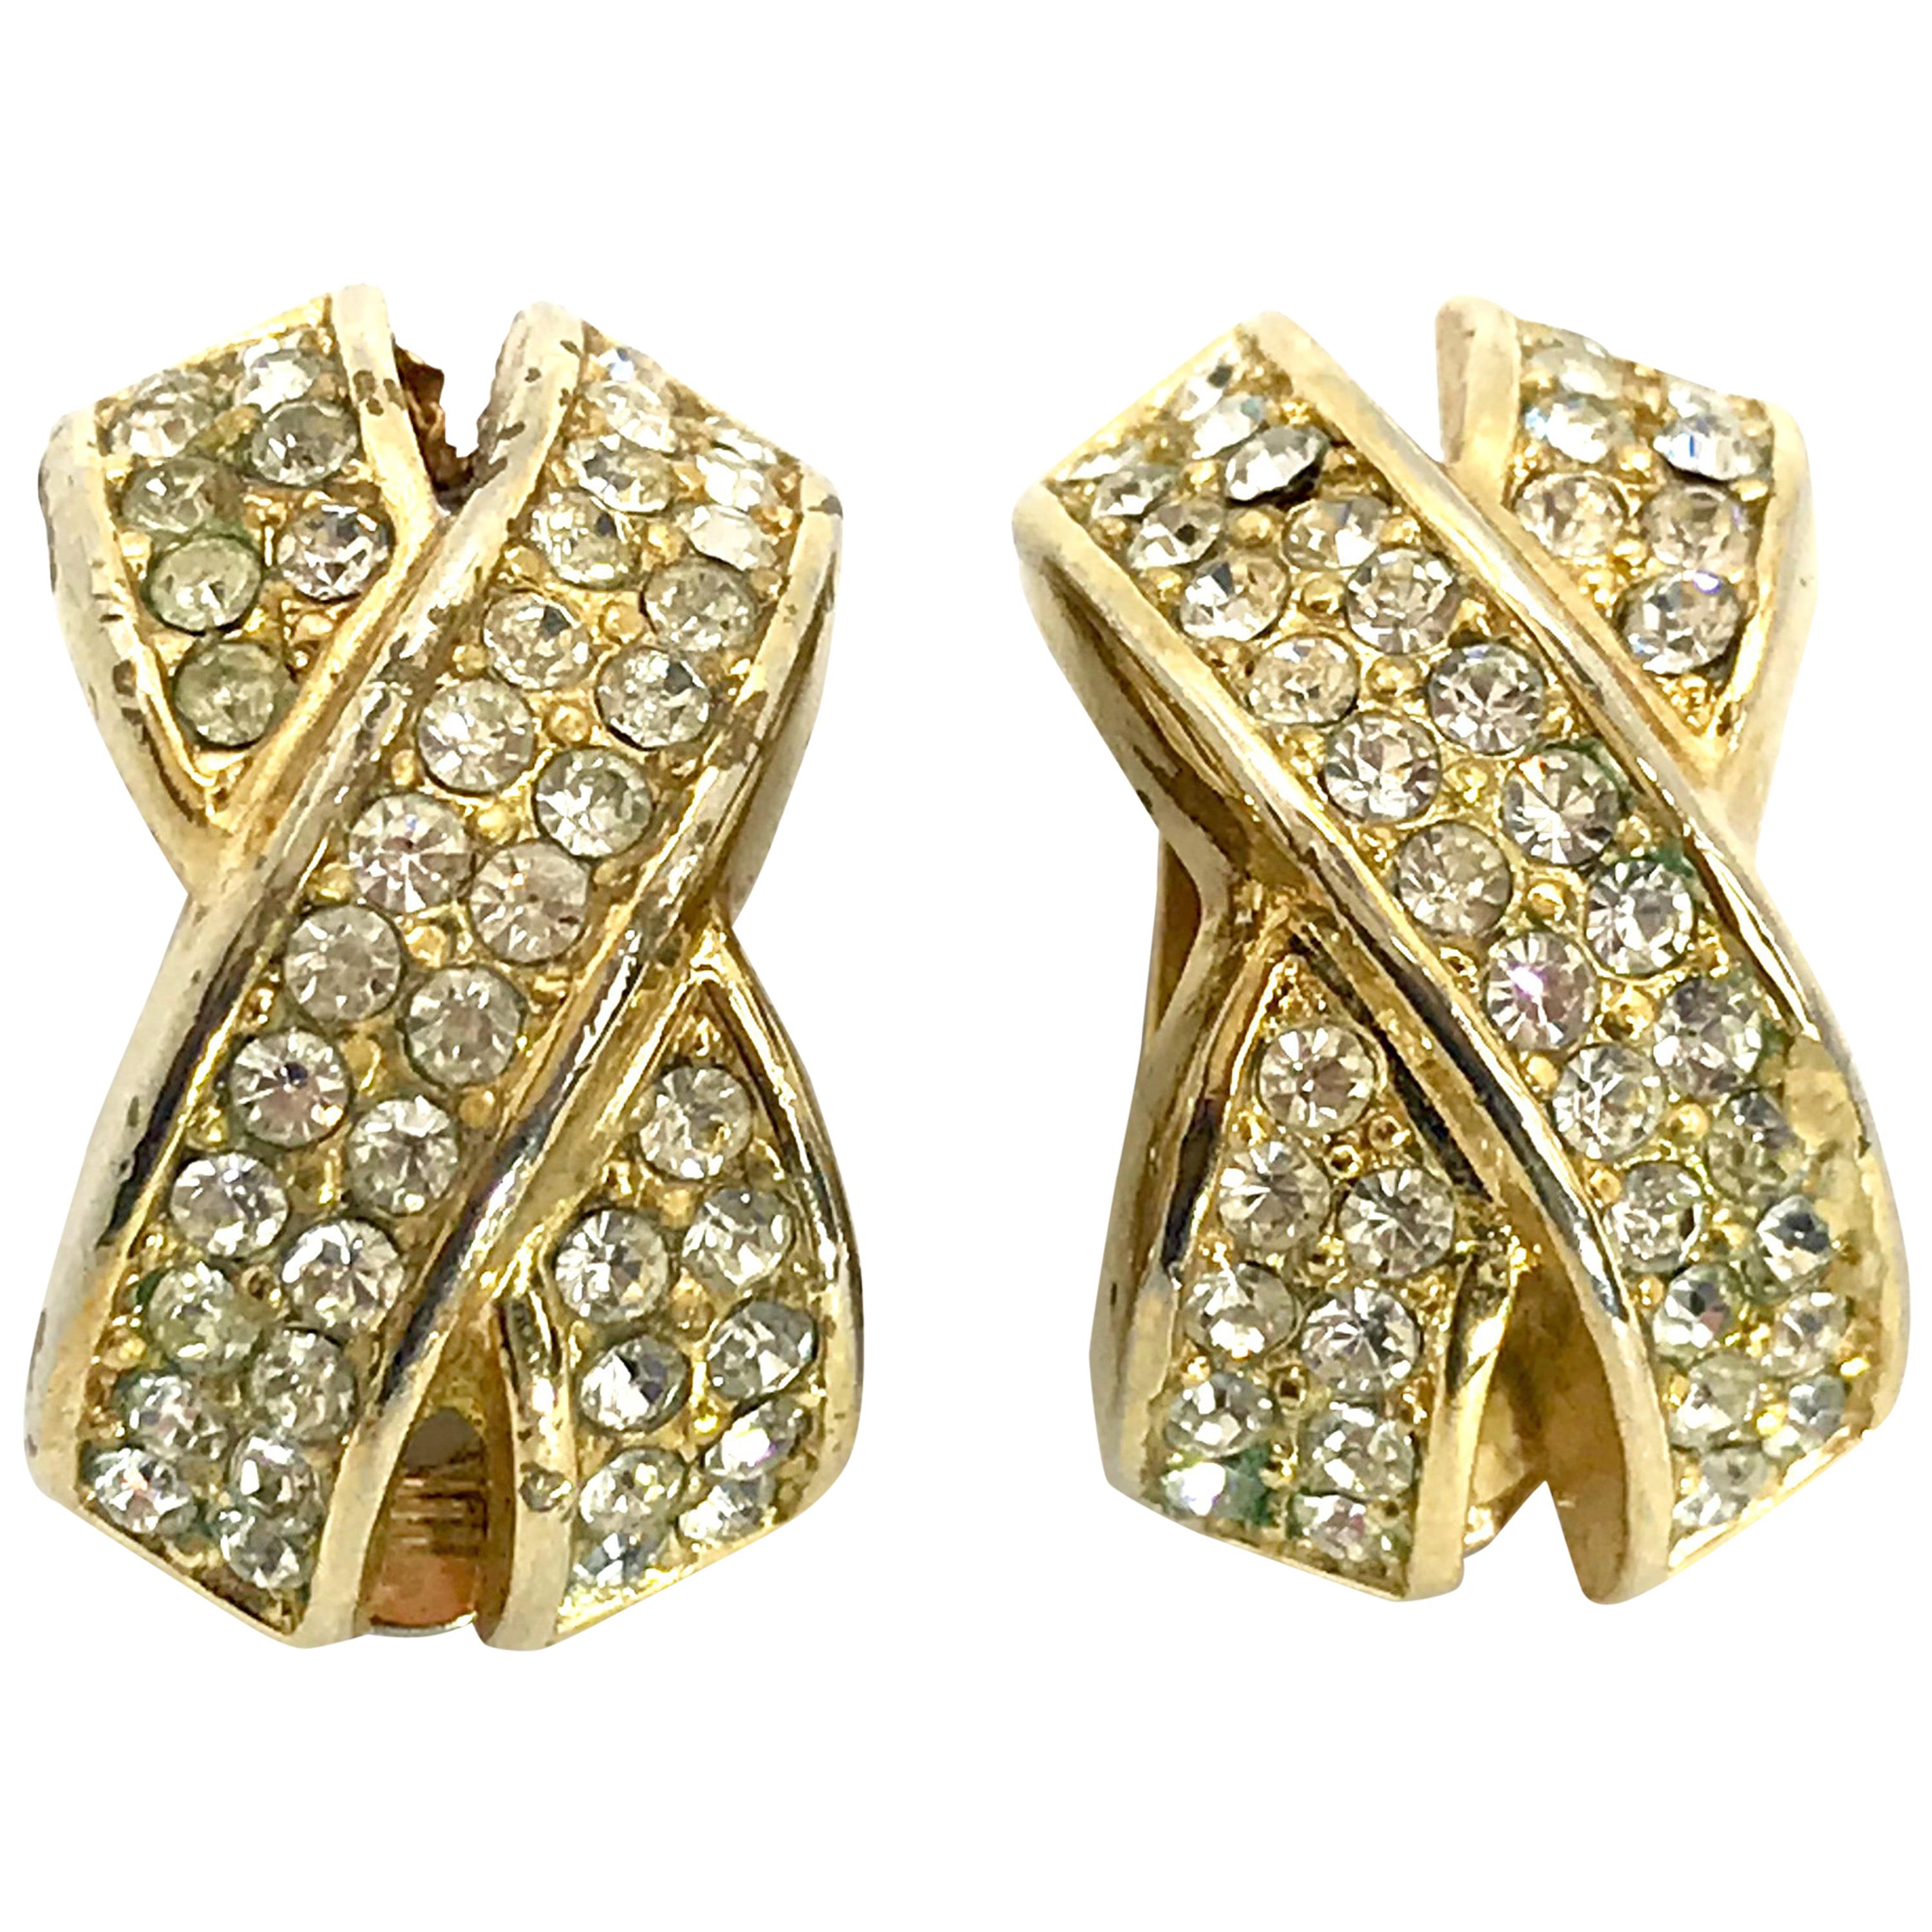 Dior 1980s Vintage Crystal Clip On Statement Earrings.